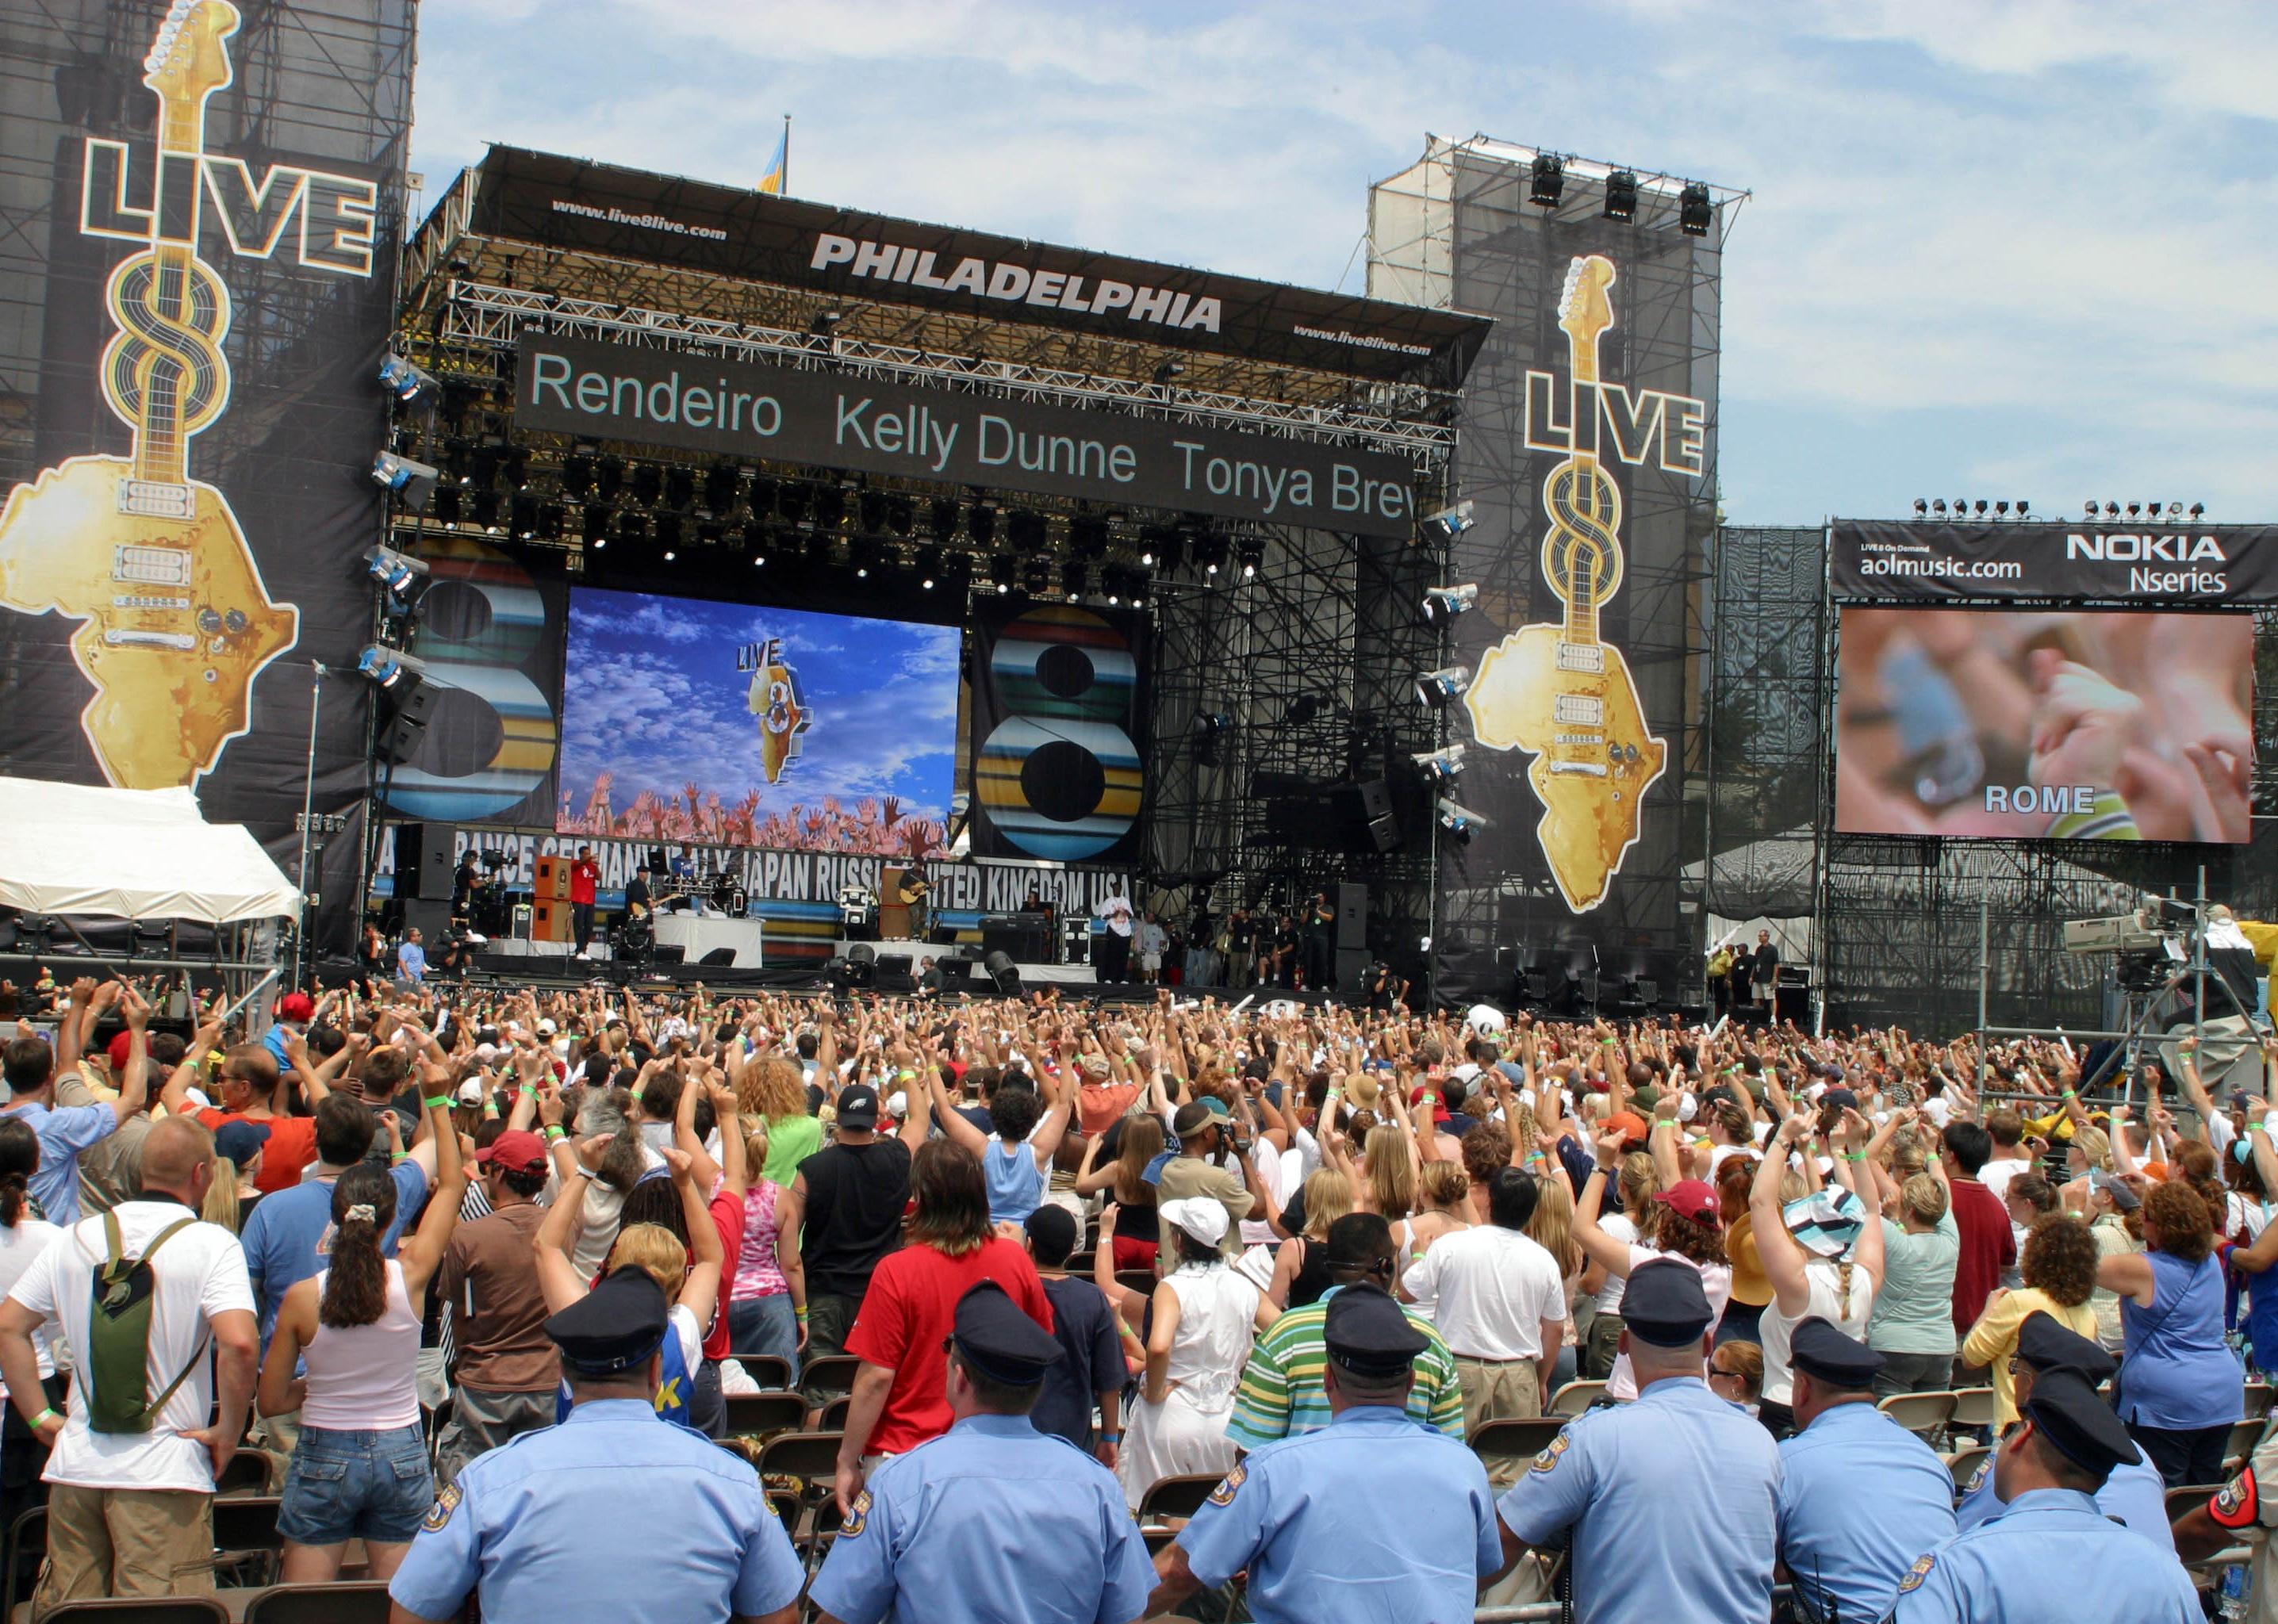 Photo of LIVE 8, crowds & stage in Philadelphia.